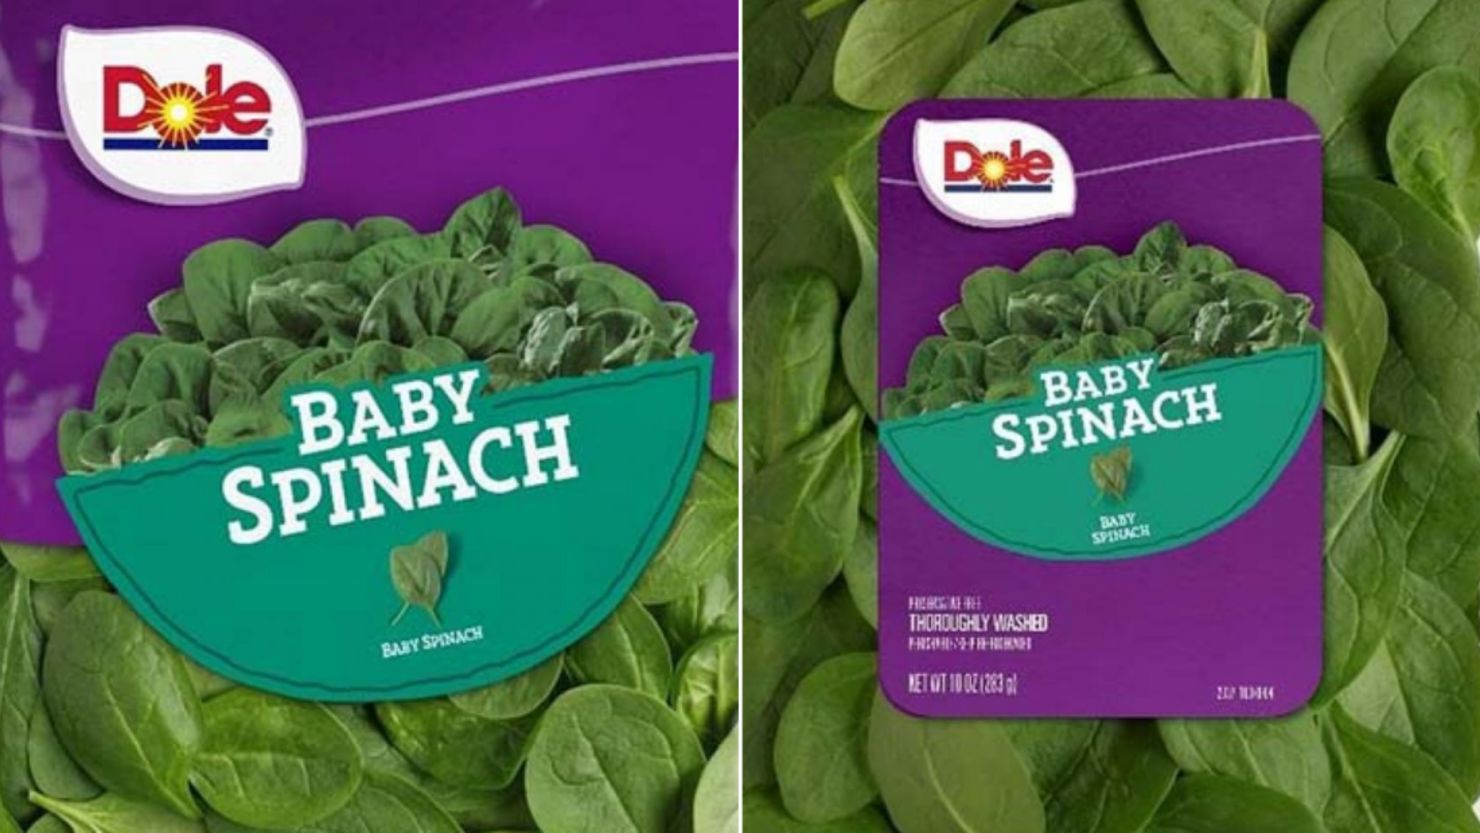 dole baby spinach recall